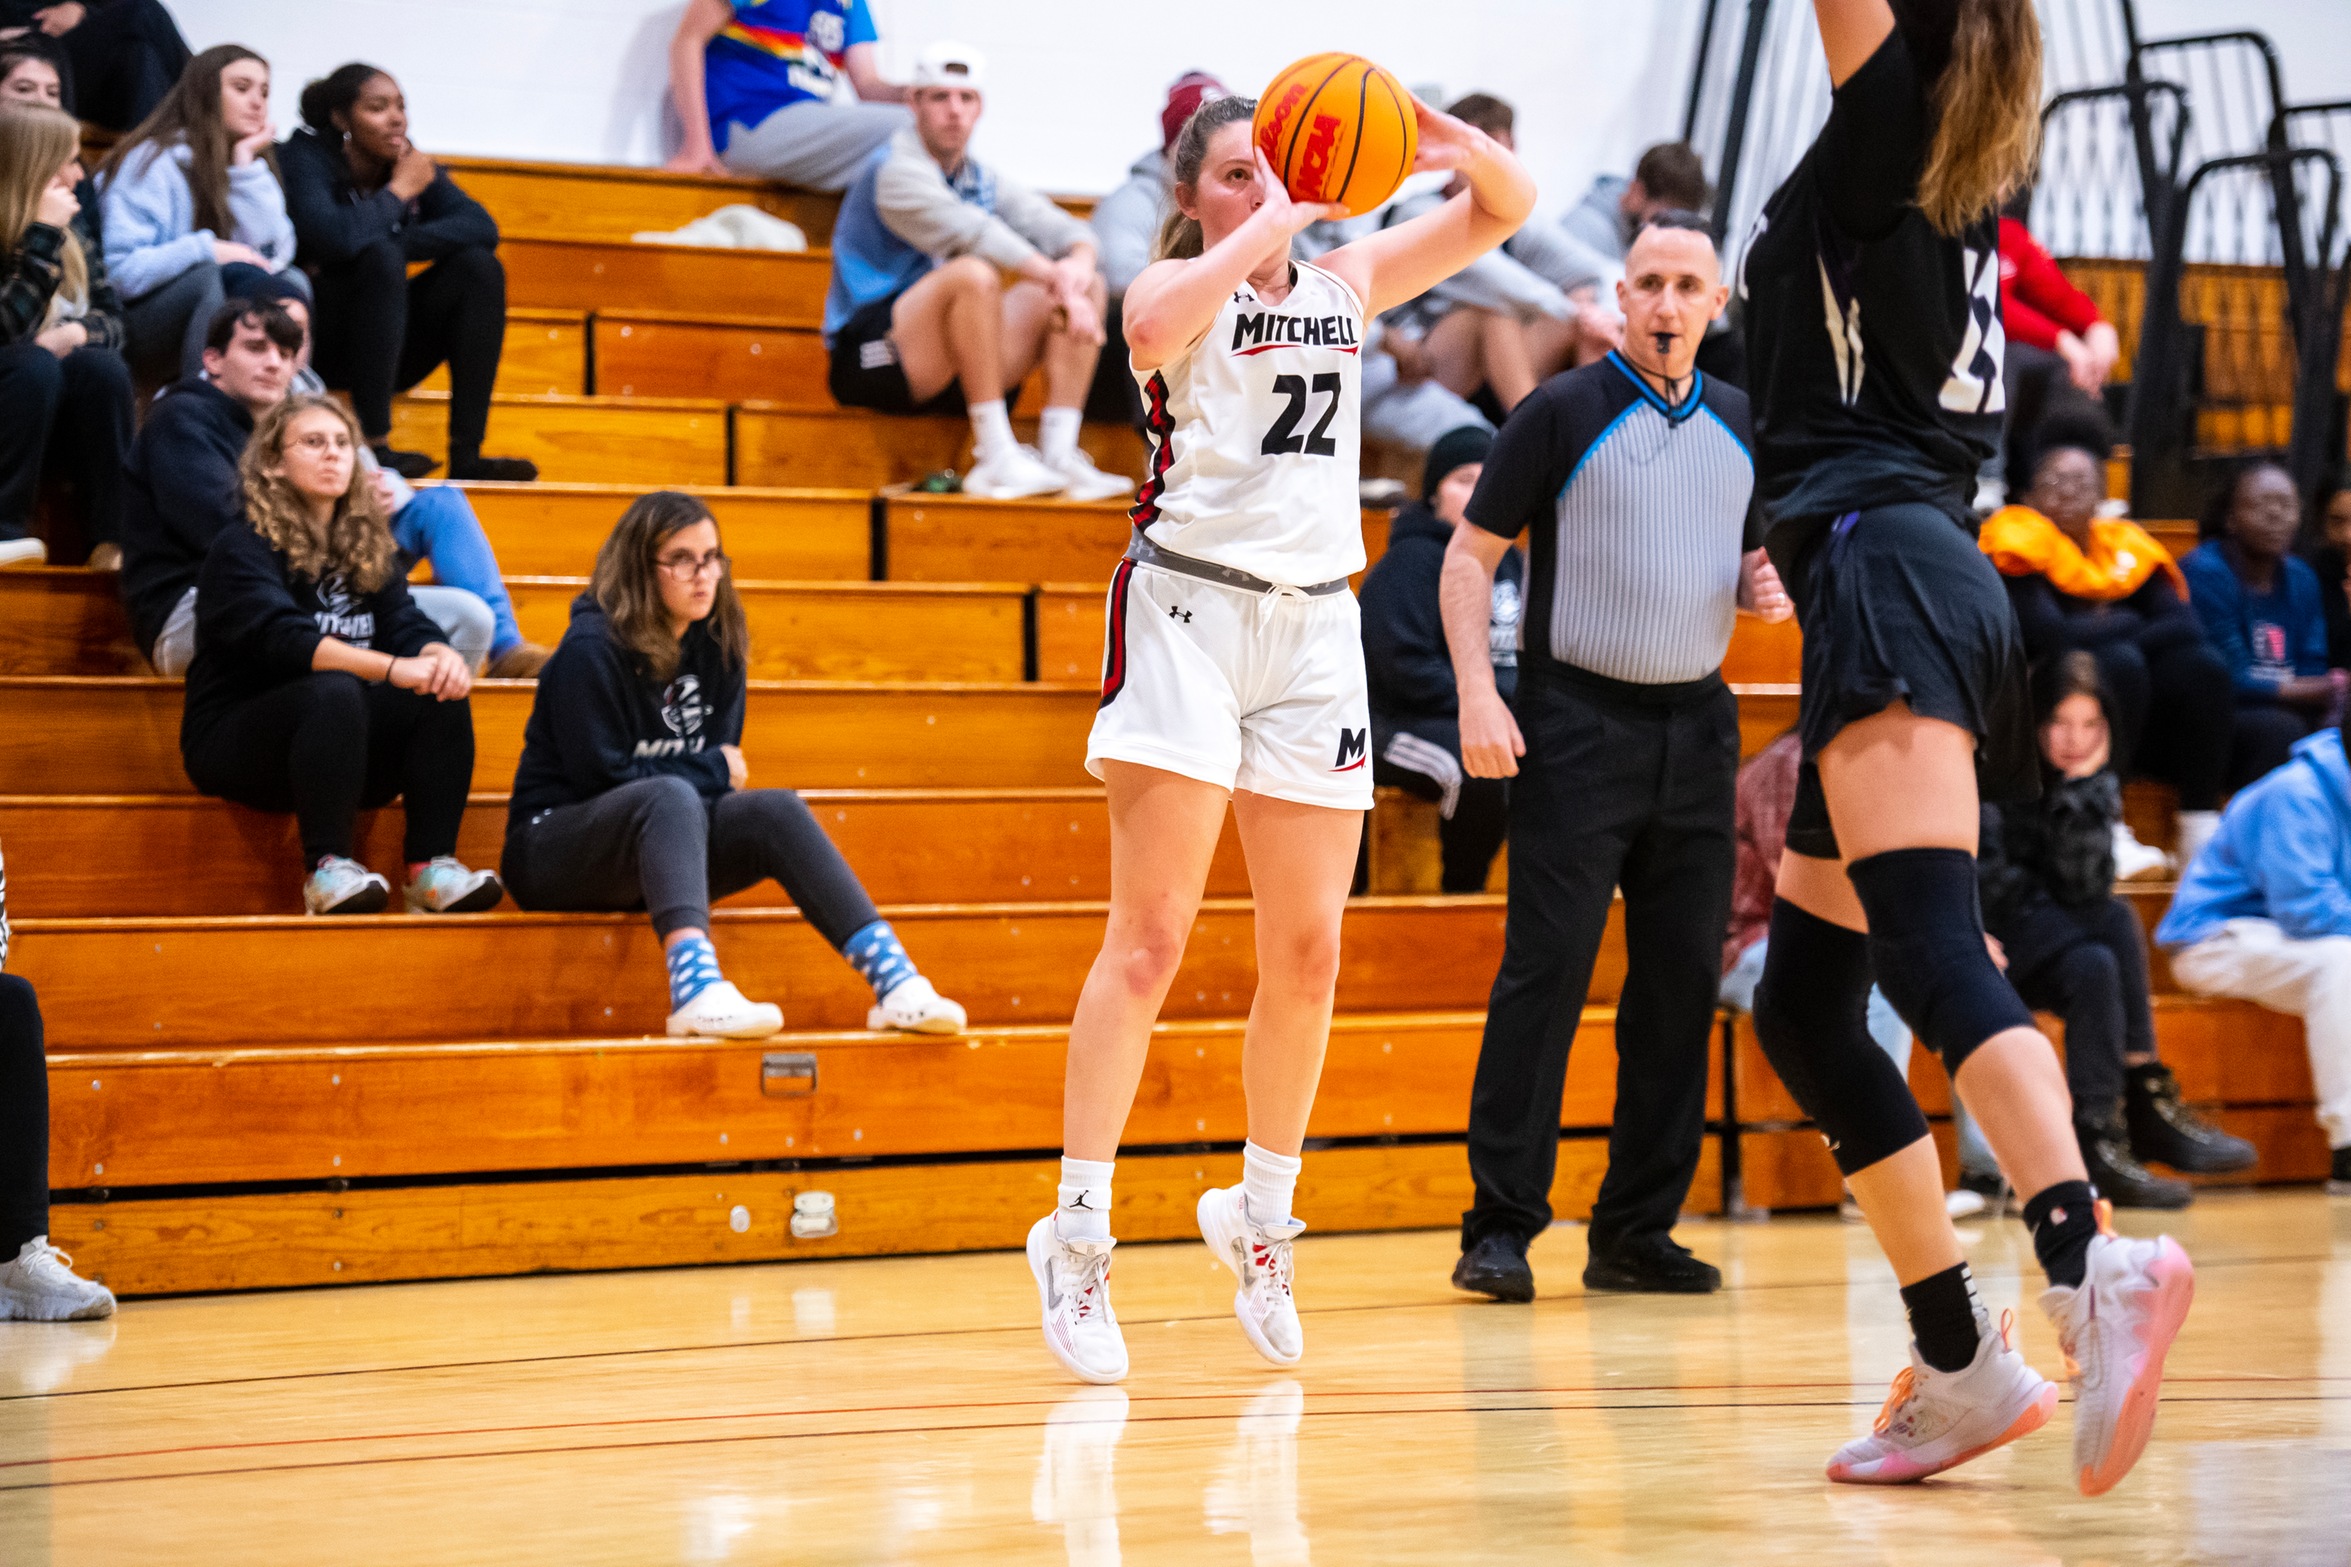 WBB Defeats Lesley, Remain Undefeated in Conference Play